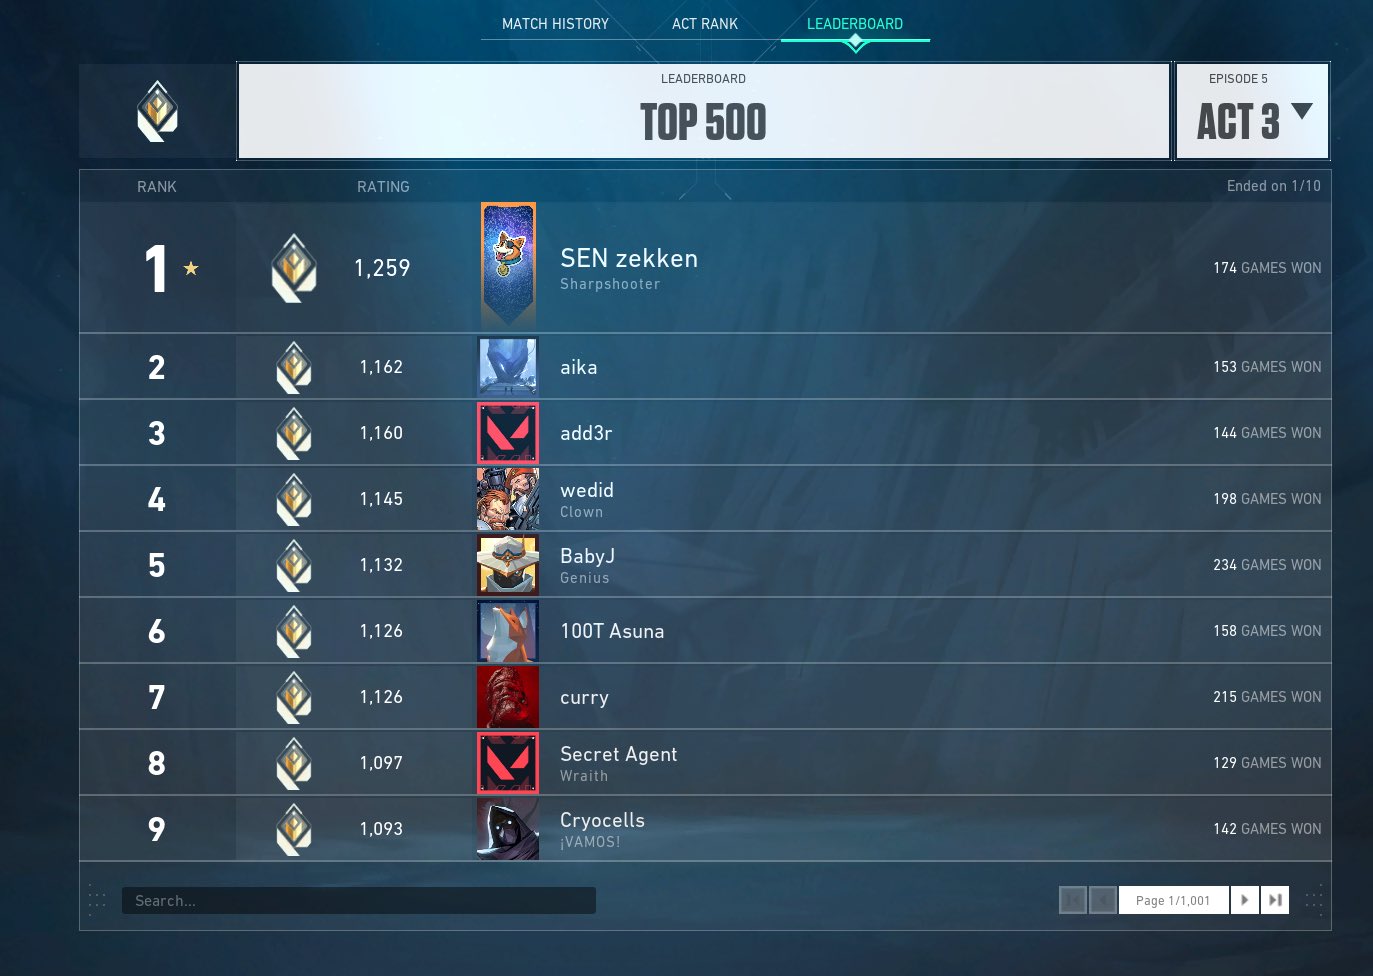 100T Asuna TOP on the Leaderboard